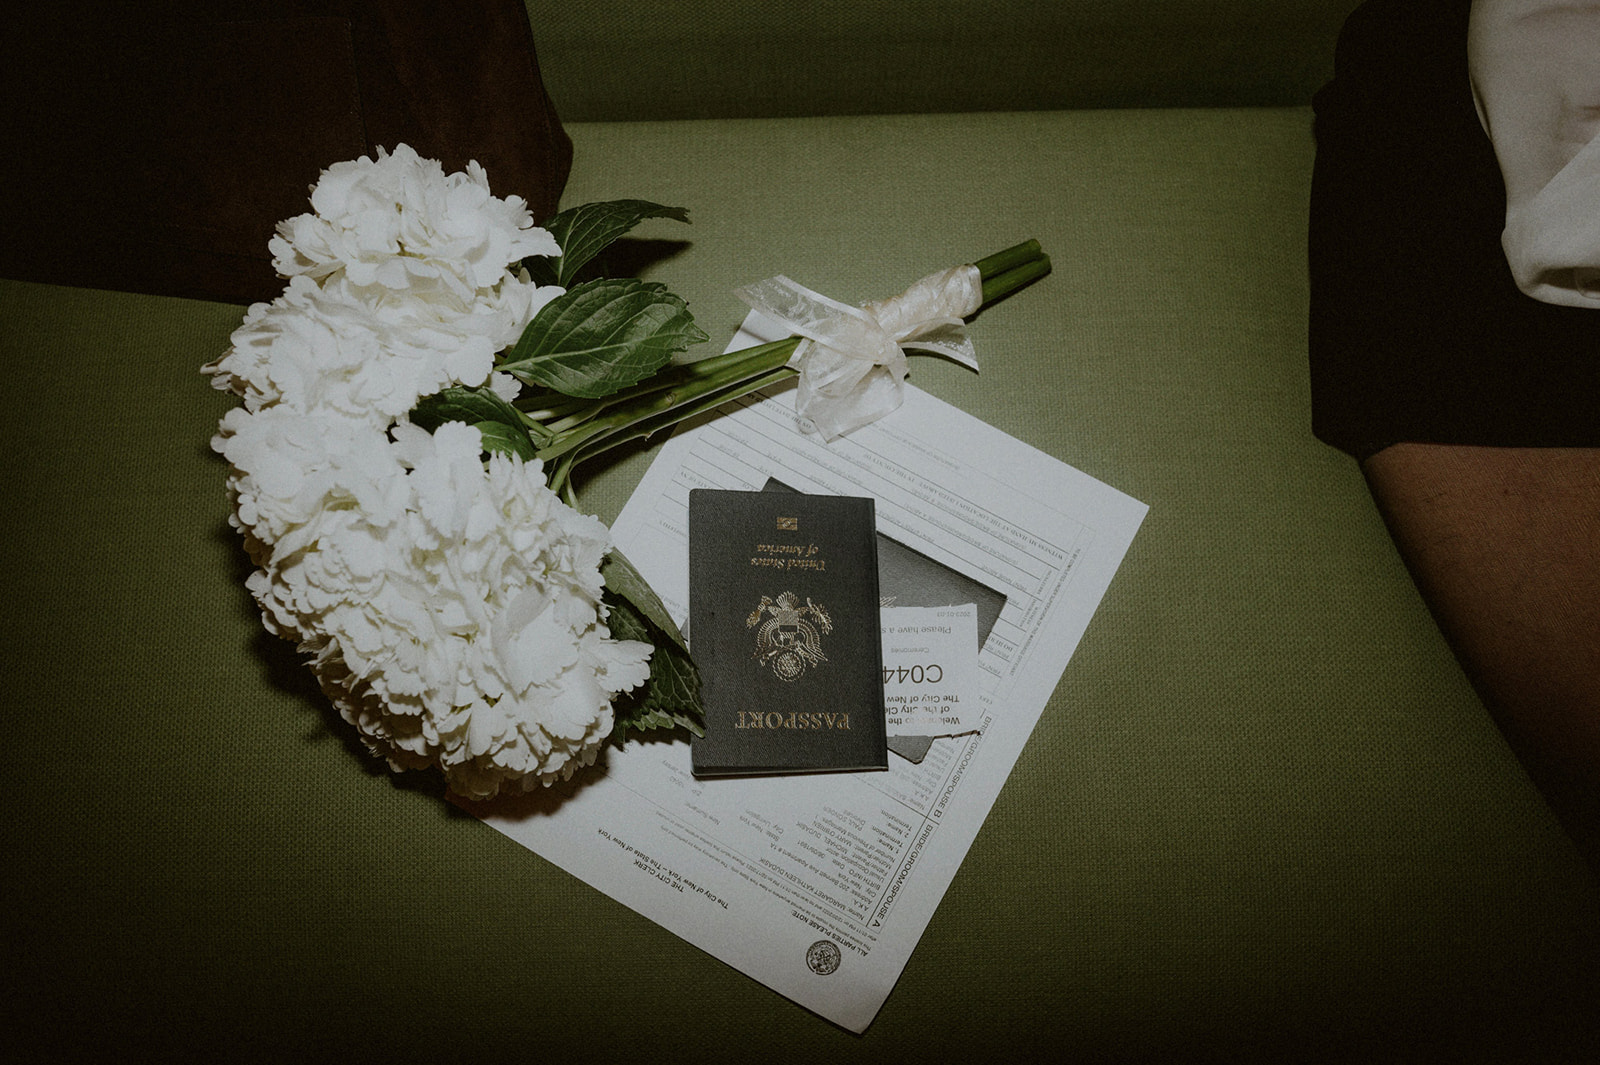 bouquet of flowers next to passport and papers on a bench at city hall